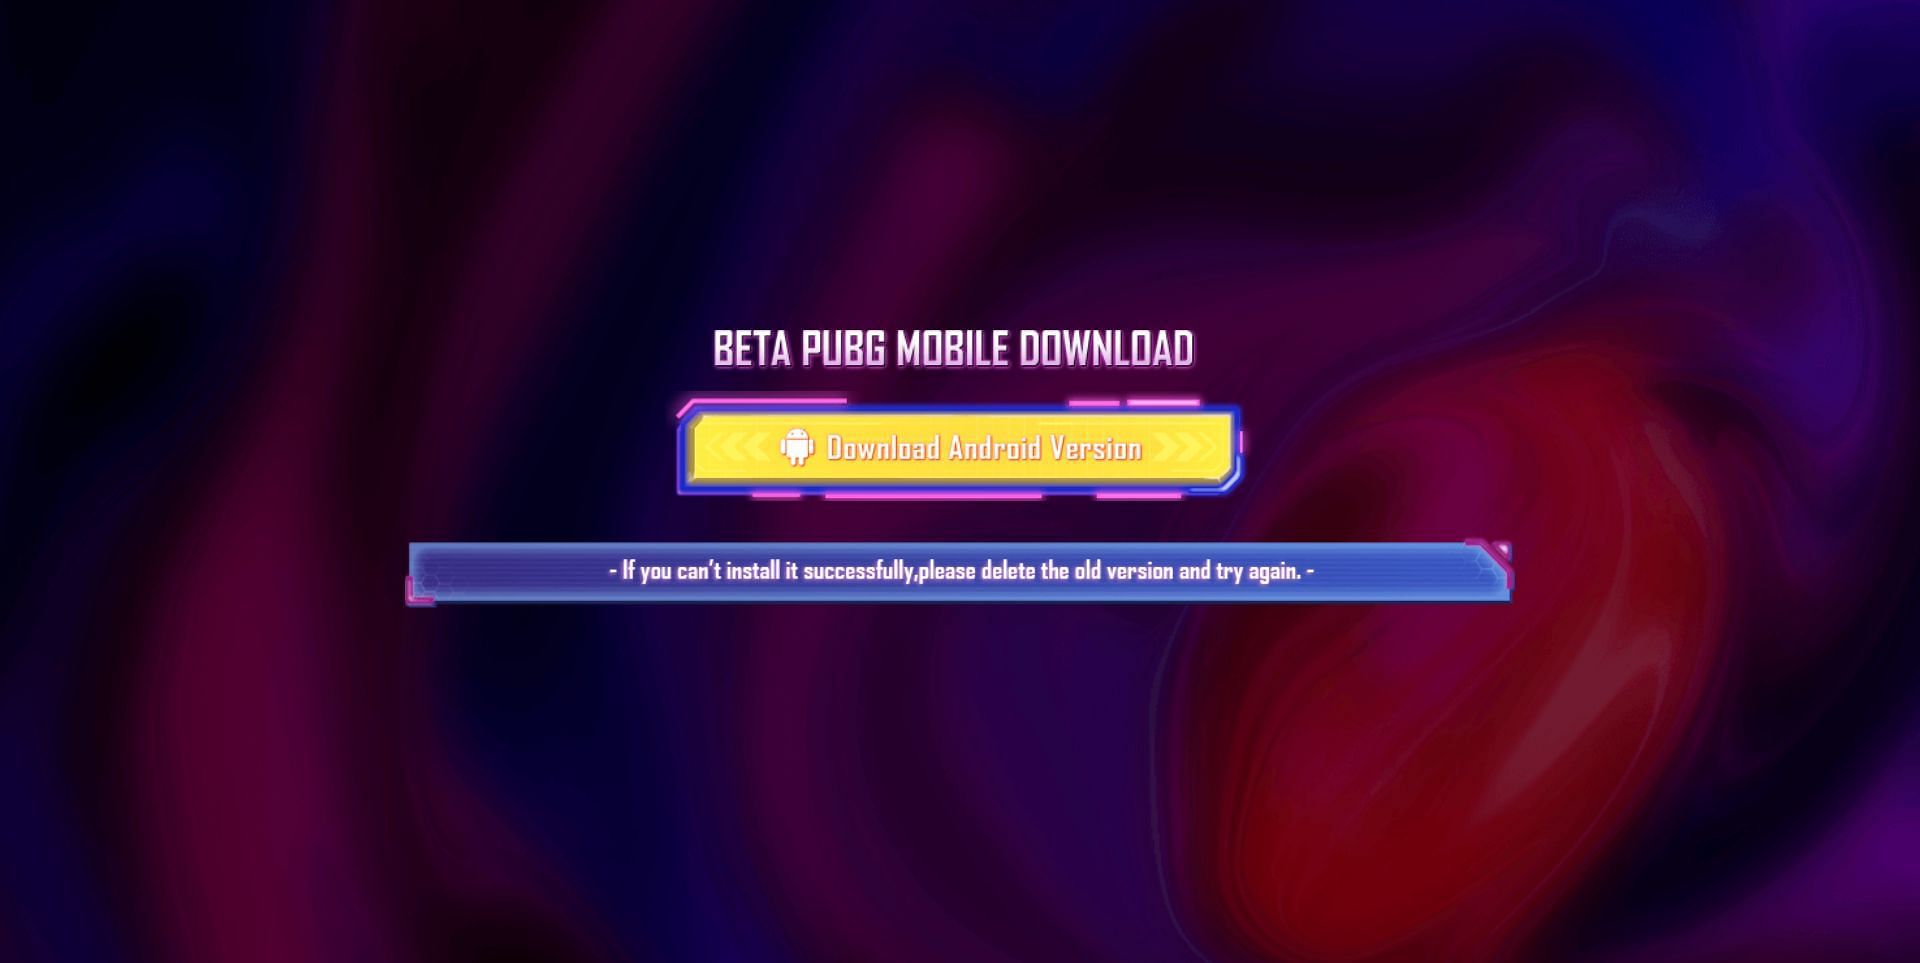 Players will have to press the button in the center to download the APK (Image via Tencent)